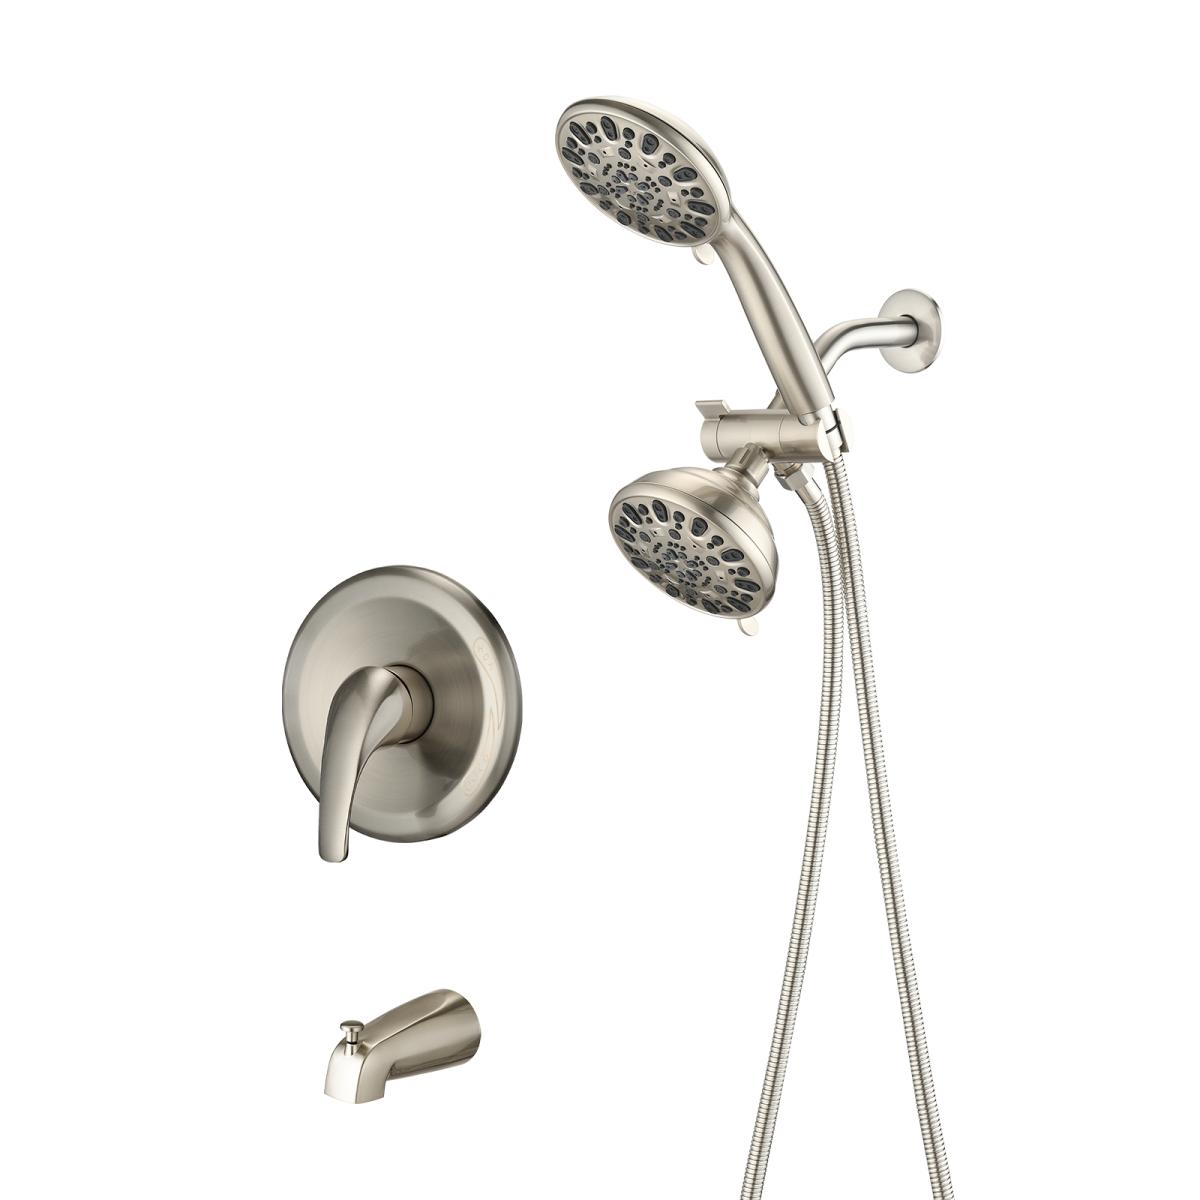 Shower System with Tub Spout Rain Shower Tub Set, High Pressure Dual 2 in 1 Shower Combo Faucet with Valve